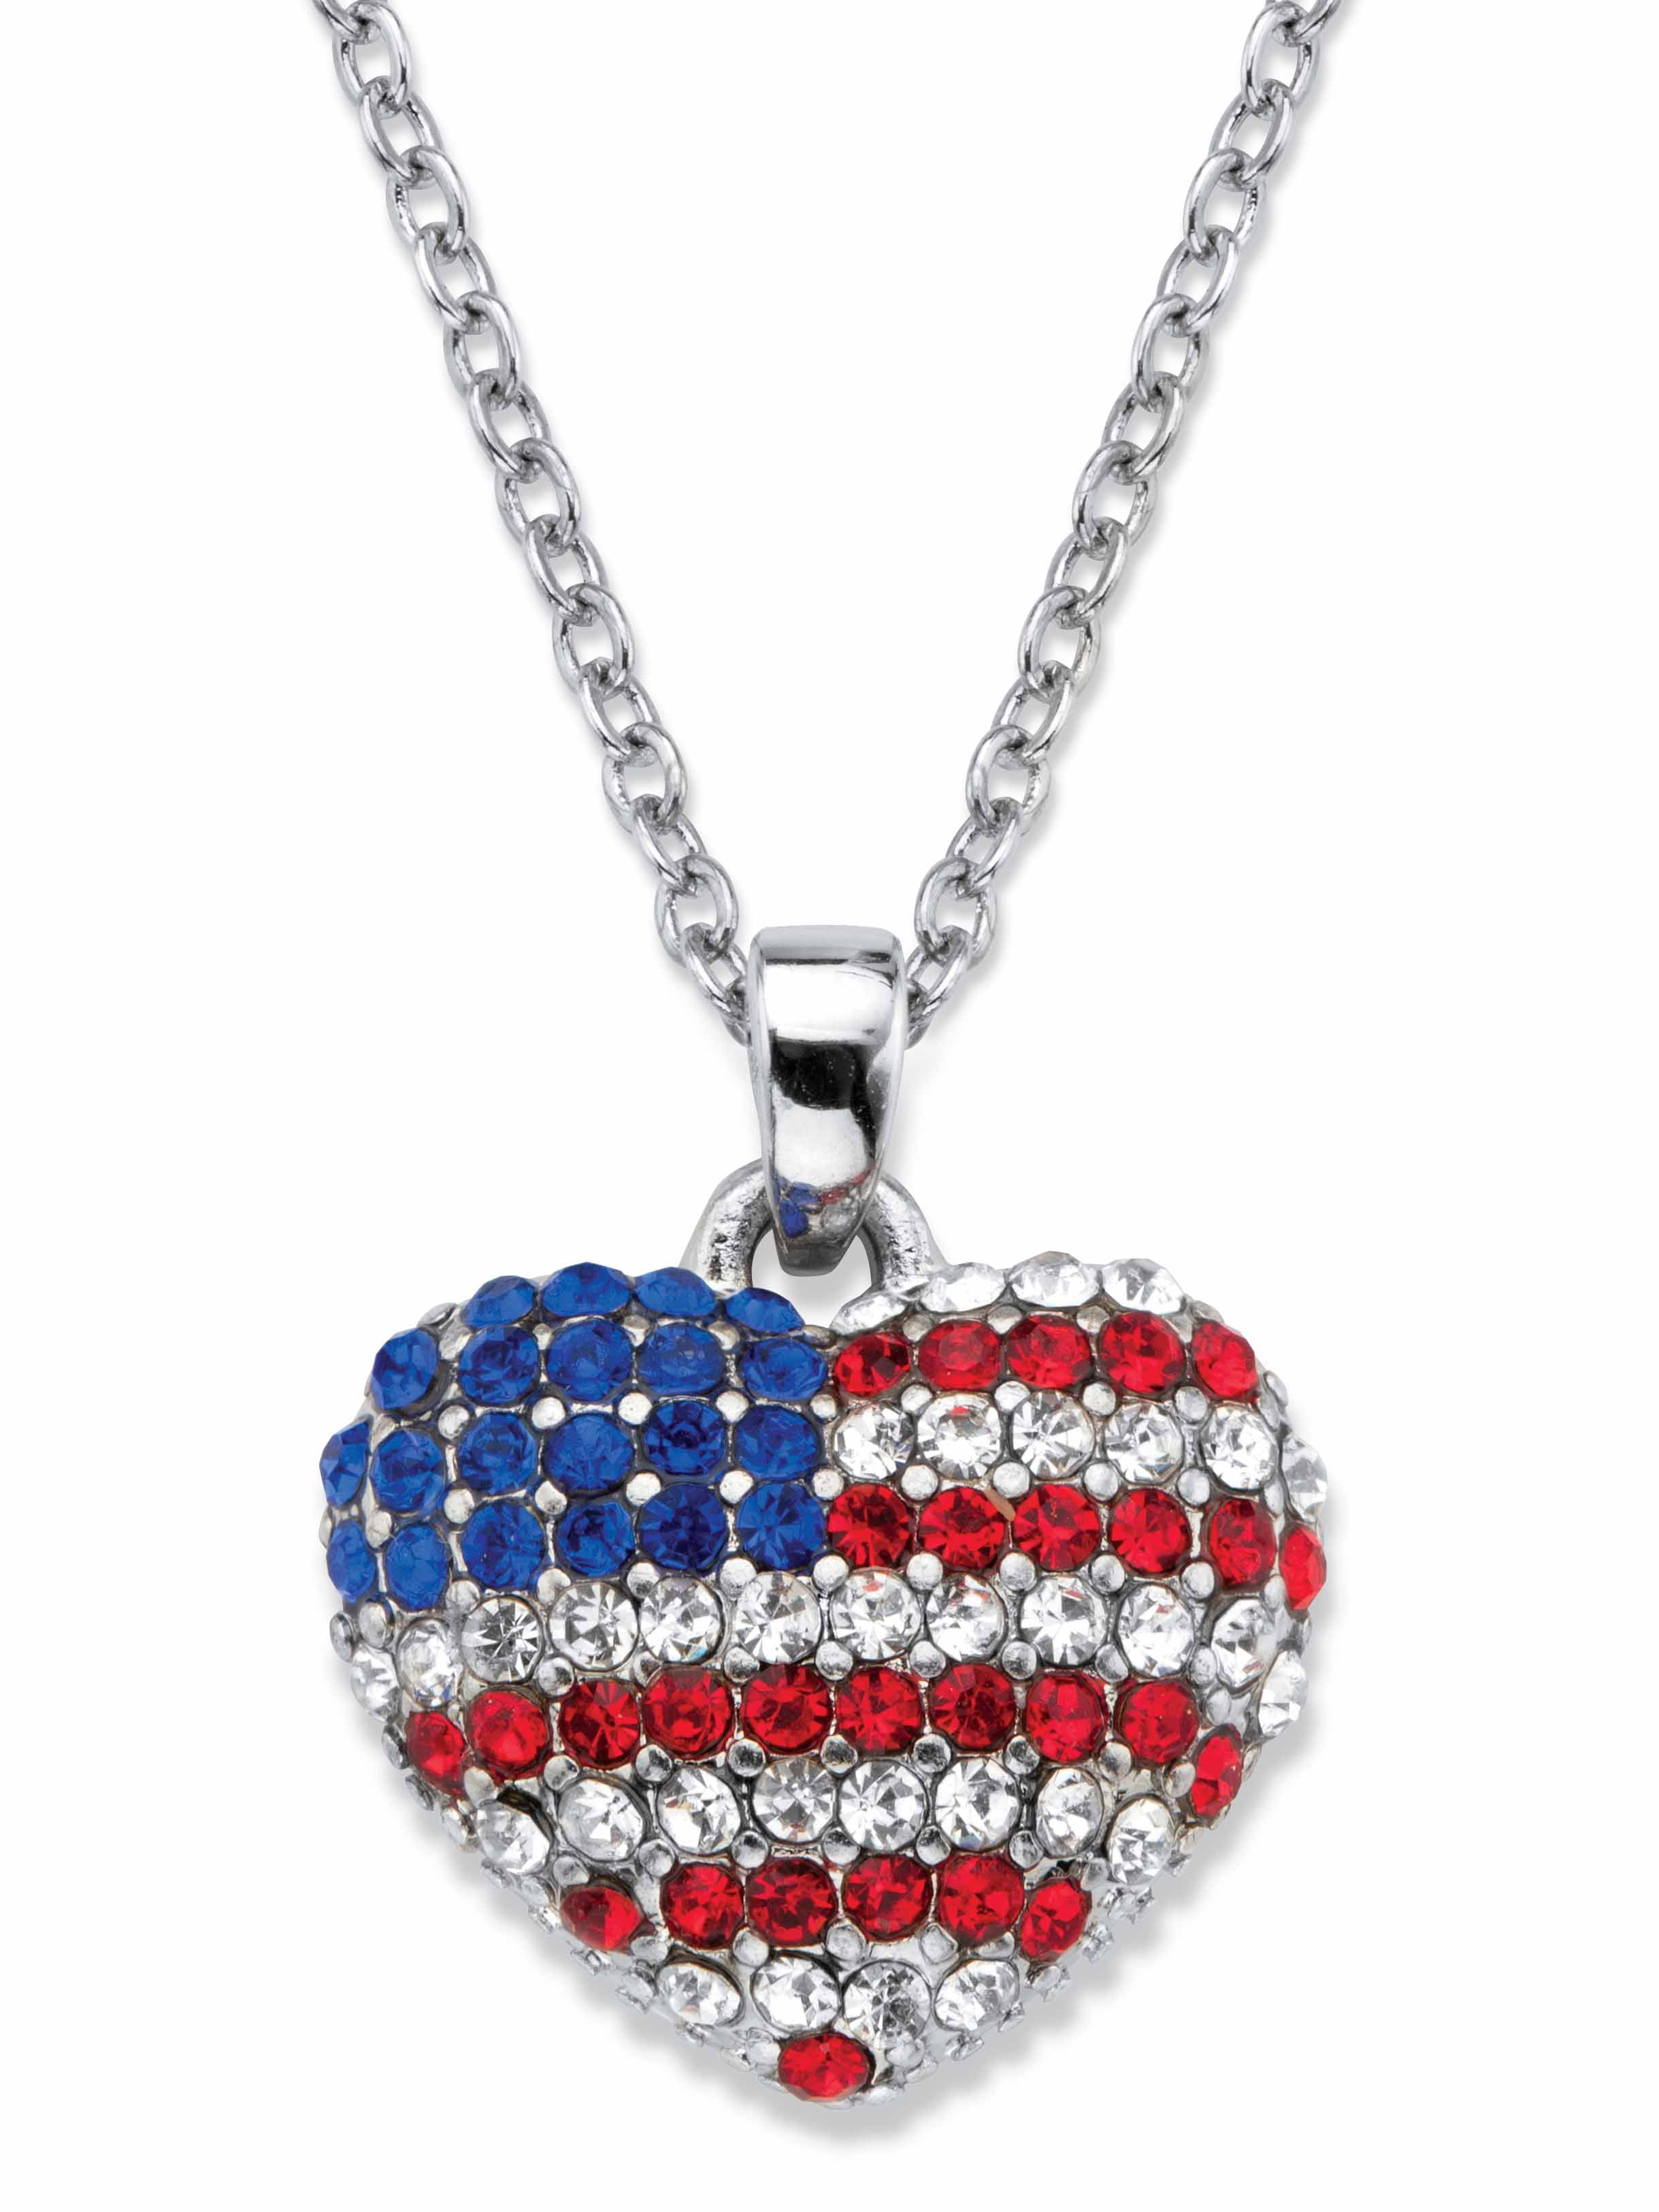 QZMCEAGS 4th of July Necklaces Patriotic Metallic Bead Independence Day  Necklace for Patriotic Party Supplies, Decorations for Independence,  Veterans Day Supplies Decorations Party Sets -4 PCS : Amazon.in: Toys &  Games